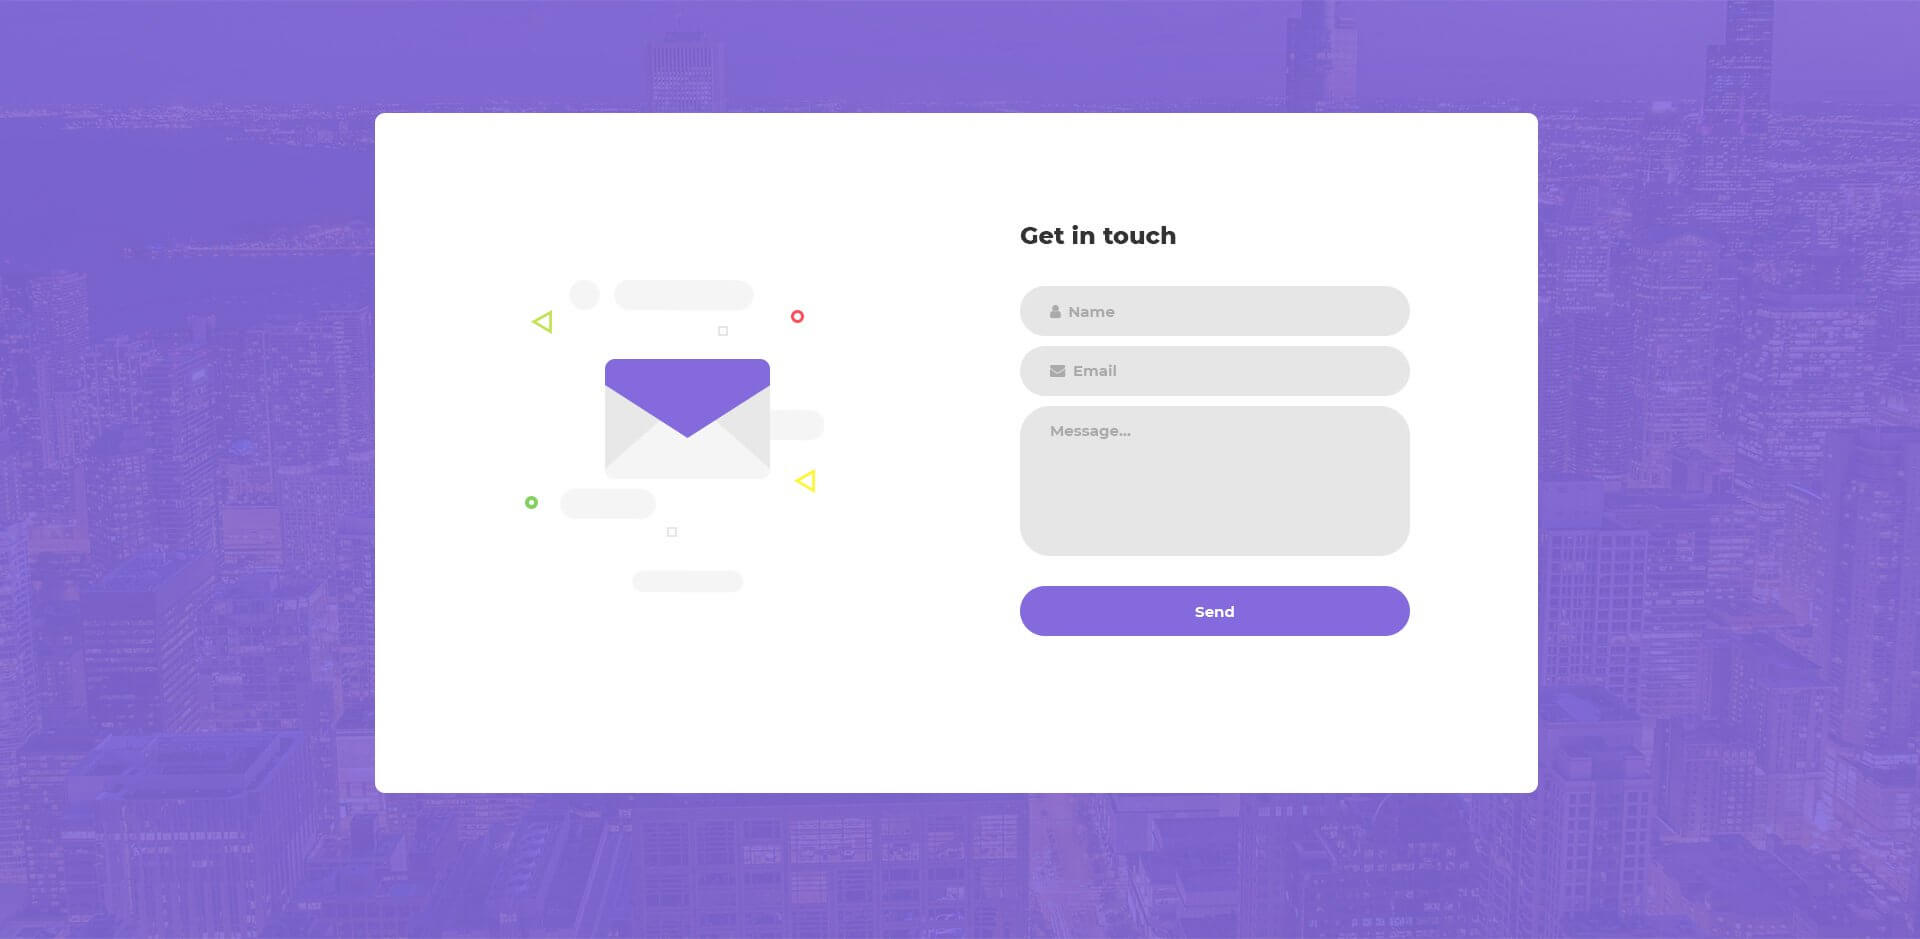 20 Best Modern Creative Free Inquiry Form Templates – Colorlib For Enquiry Form Template Word